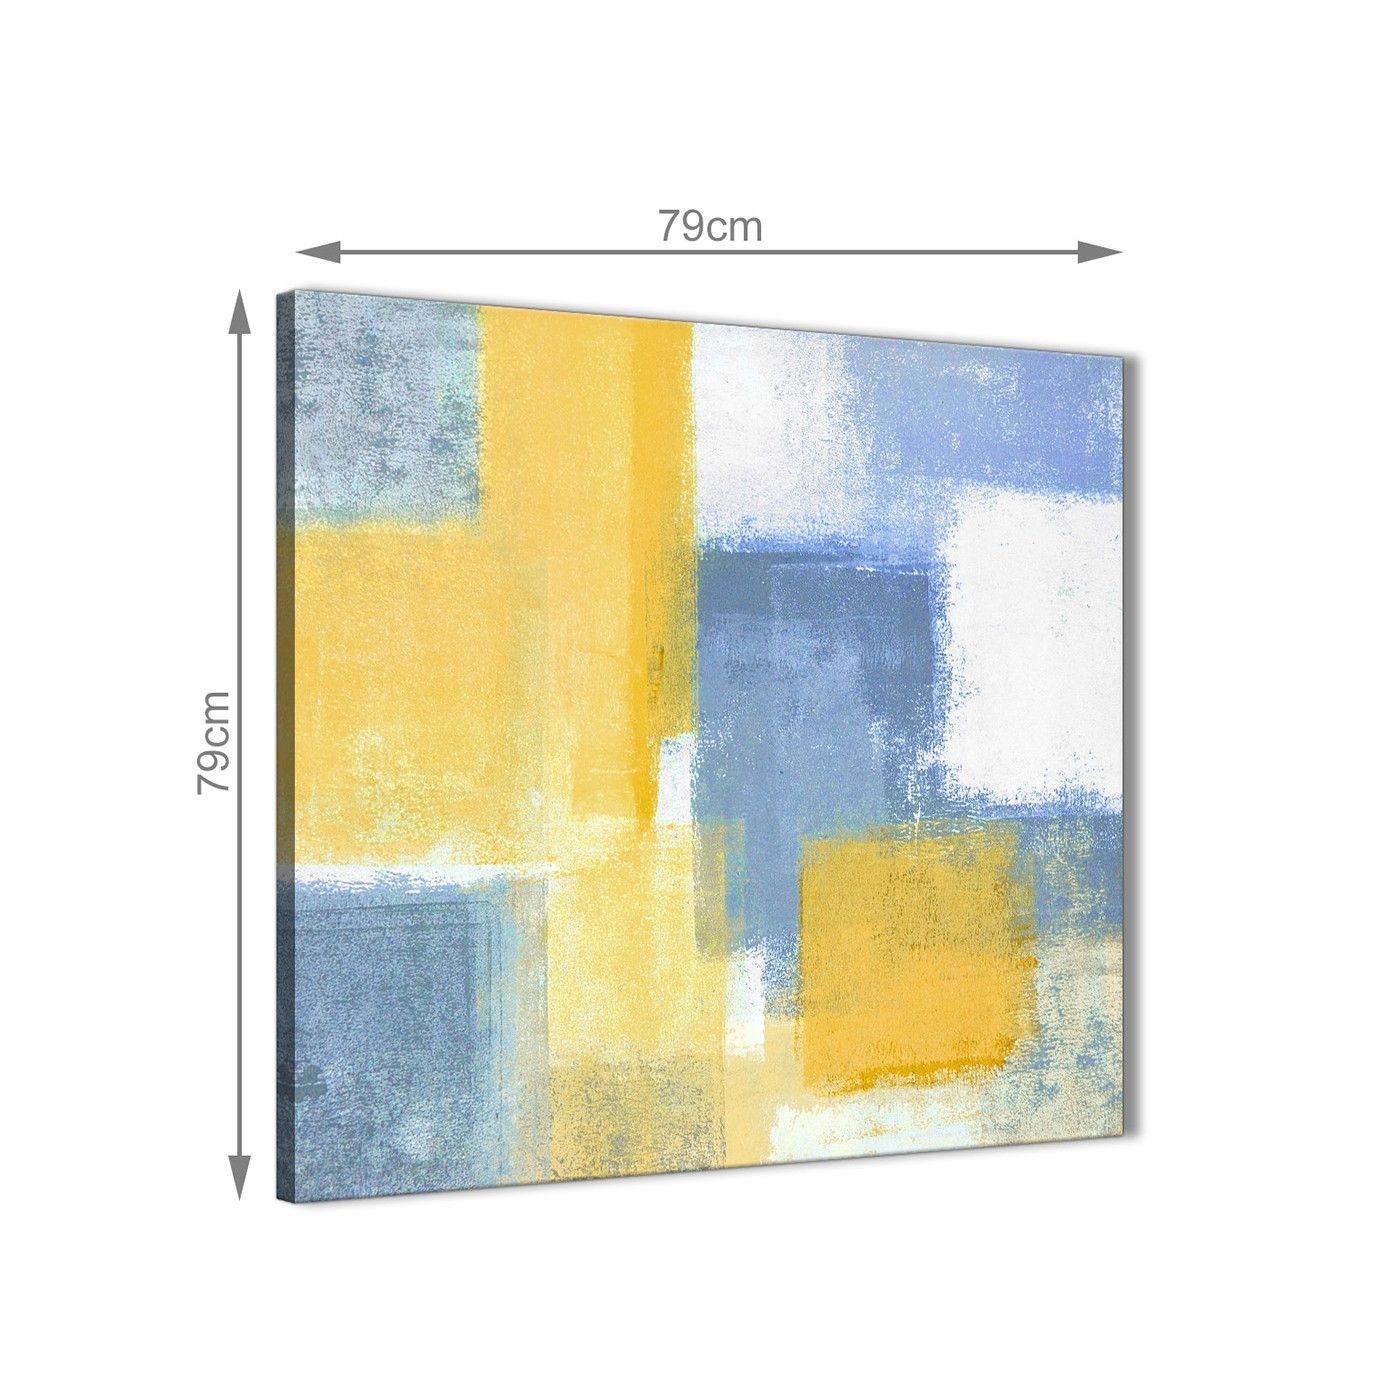 Mustard Yellow Blue Abstract Office Canvas Wall Art Decor 1s371l Pertaining To Yellow Wall Art (View 11 of 20)